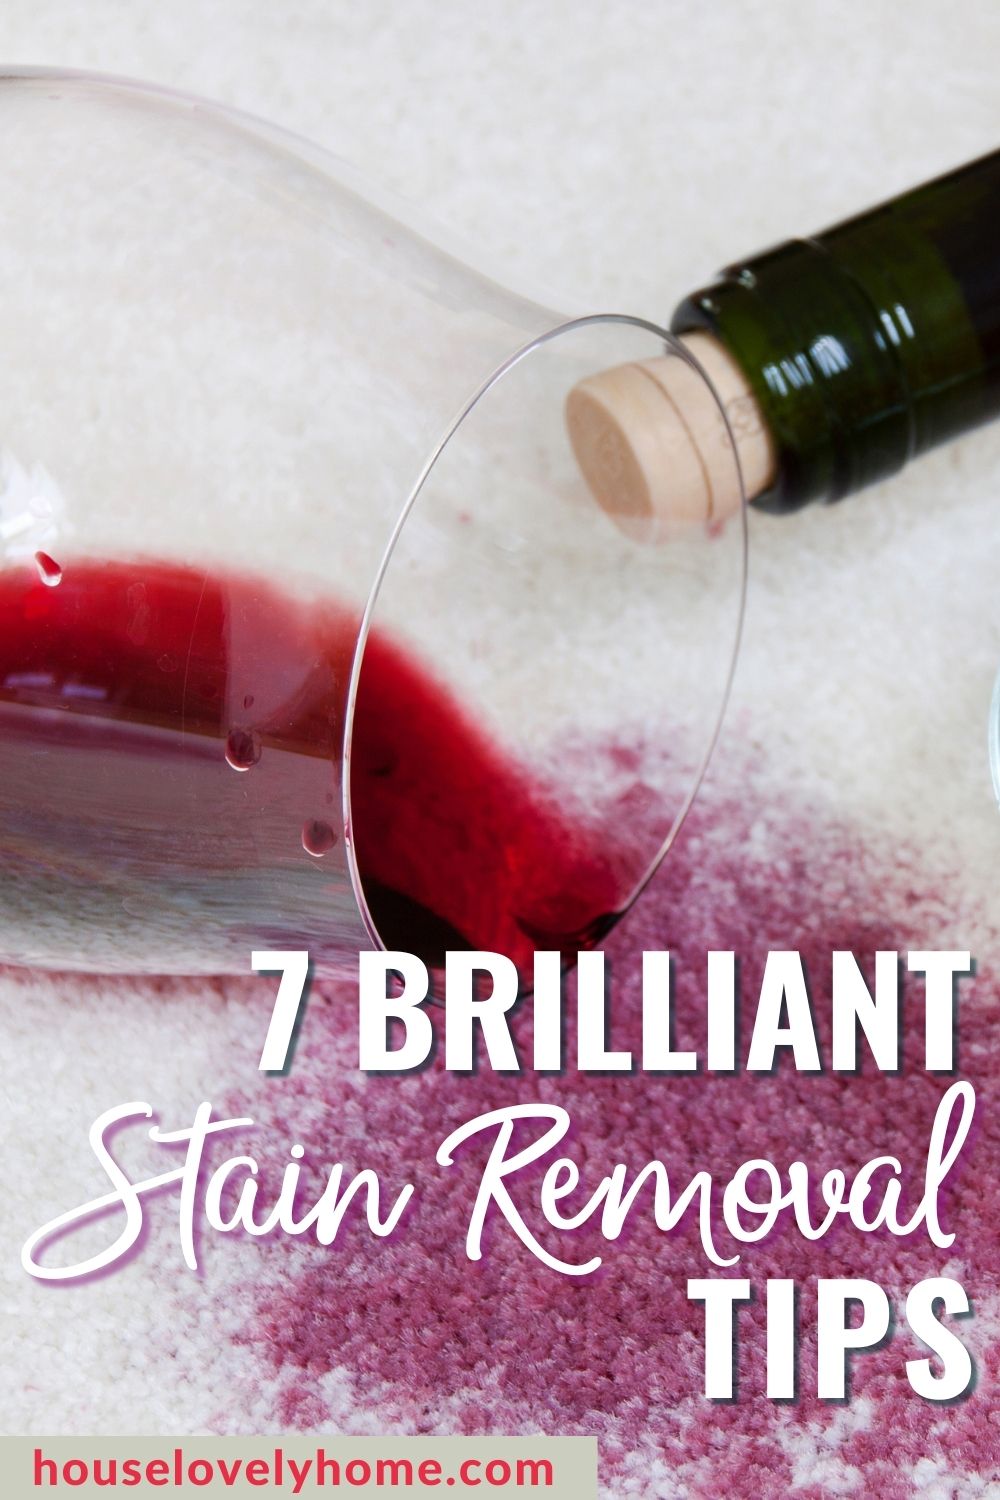 Image showing a glass lying with red wine spilled on white cloth beside a green bottle with cork and a text overlays that read 7 Brilliant Stain Removal Tips